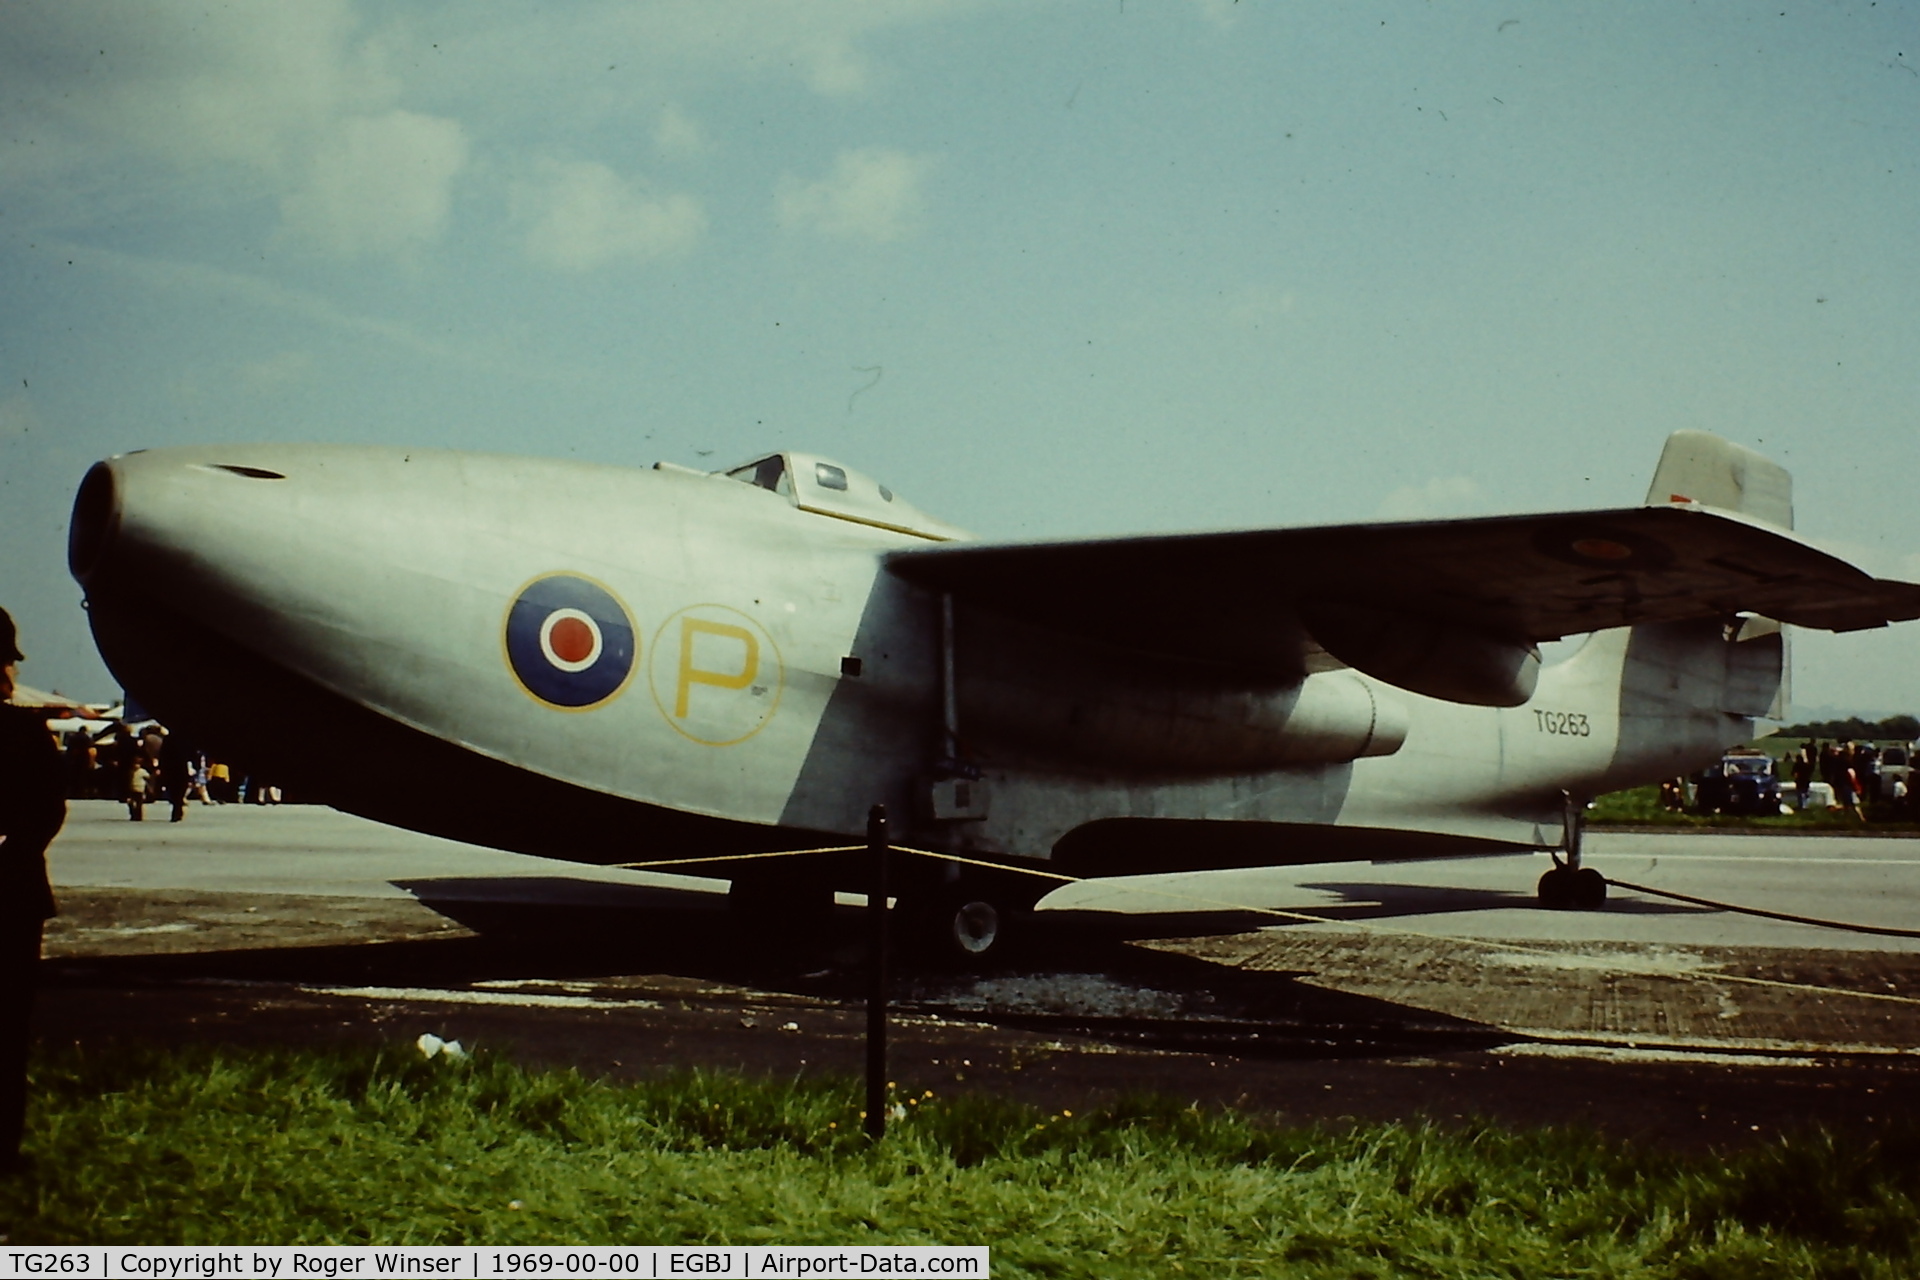 TG263, 1947 Saunders-Roe SR.A.1 C/N G-12-1, Prototype aircraft seen at the Skyfame Museum, Staverton Airport in 1969